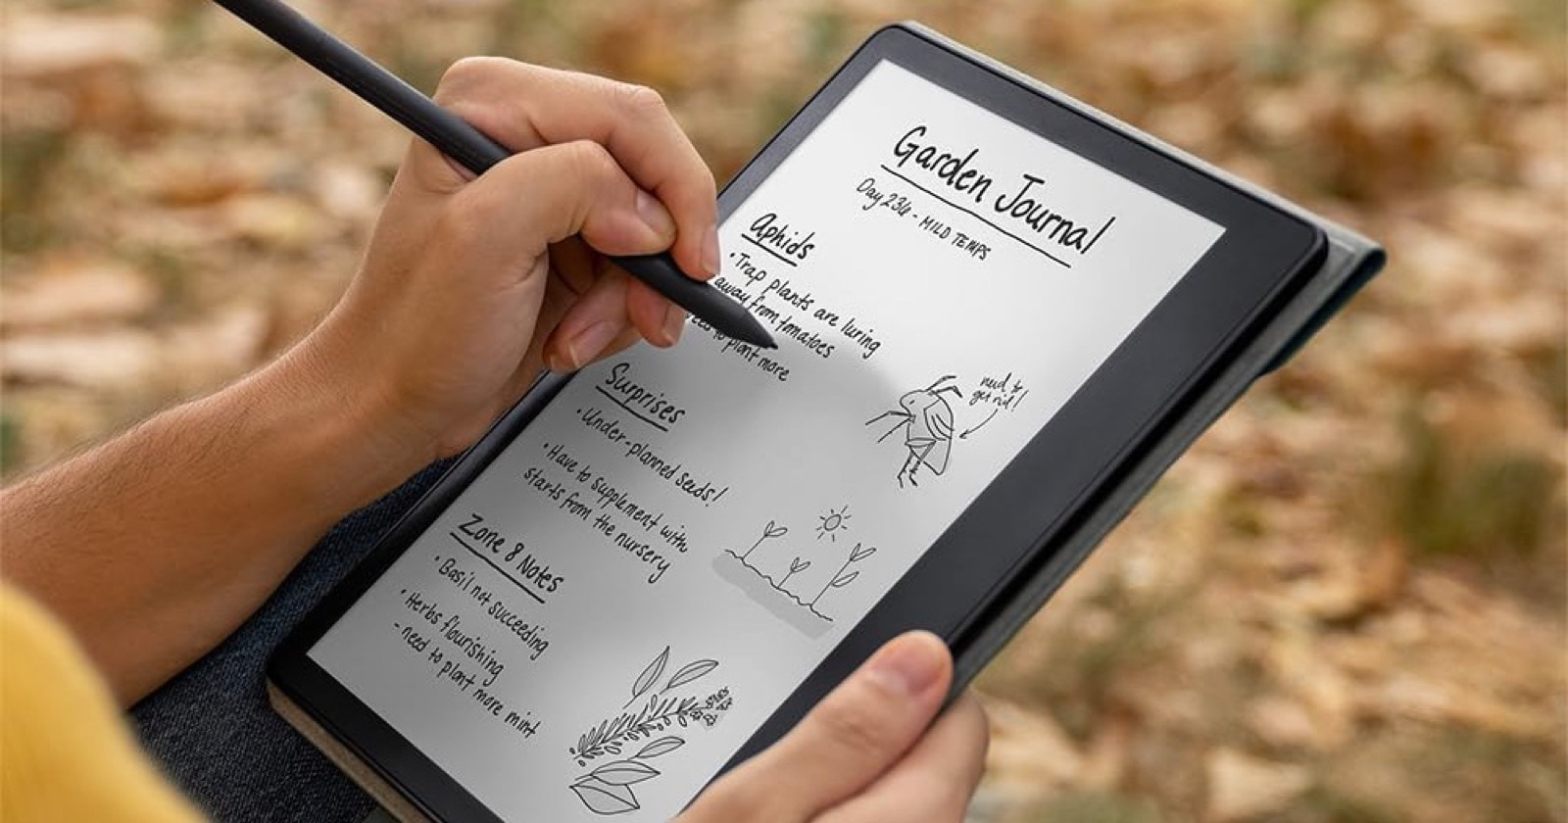 New features have just been added to Send to Kindle